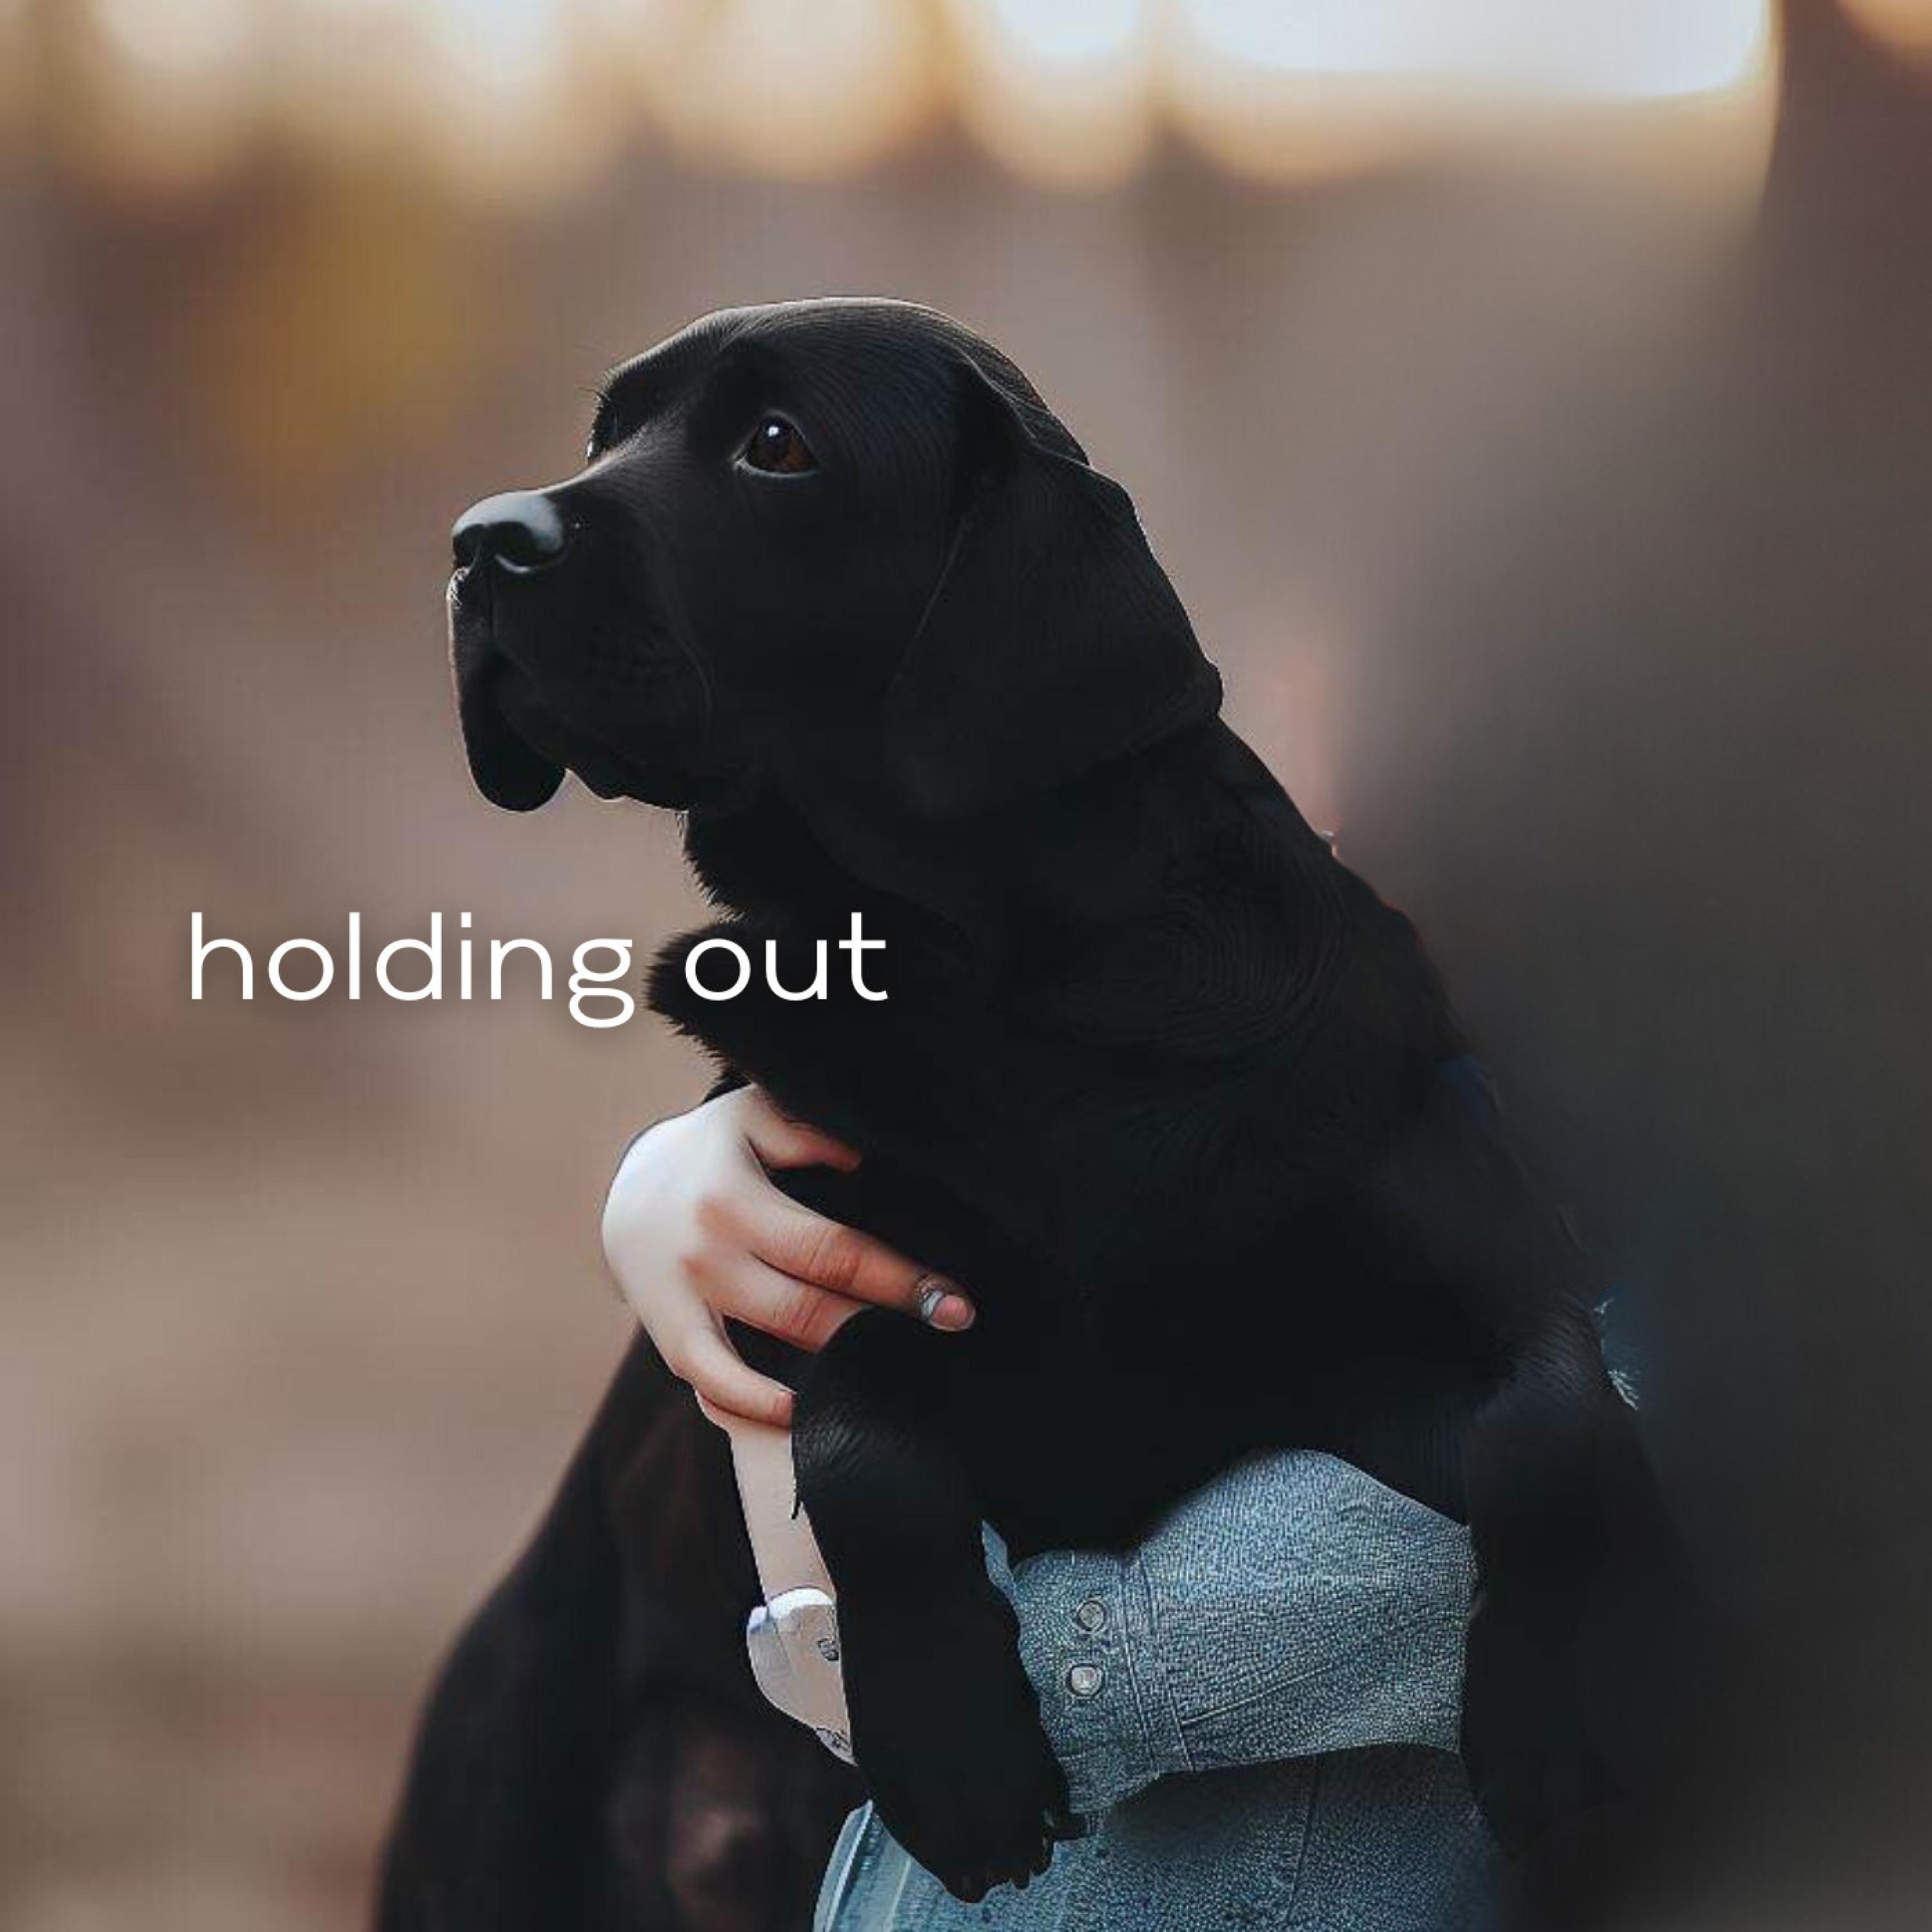 Robert Crowell - holding out